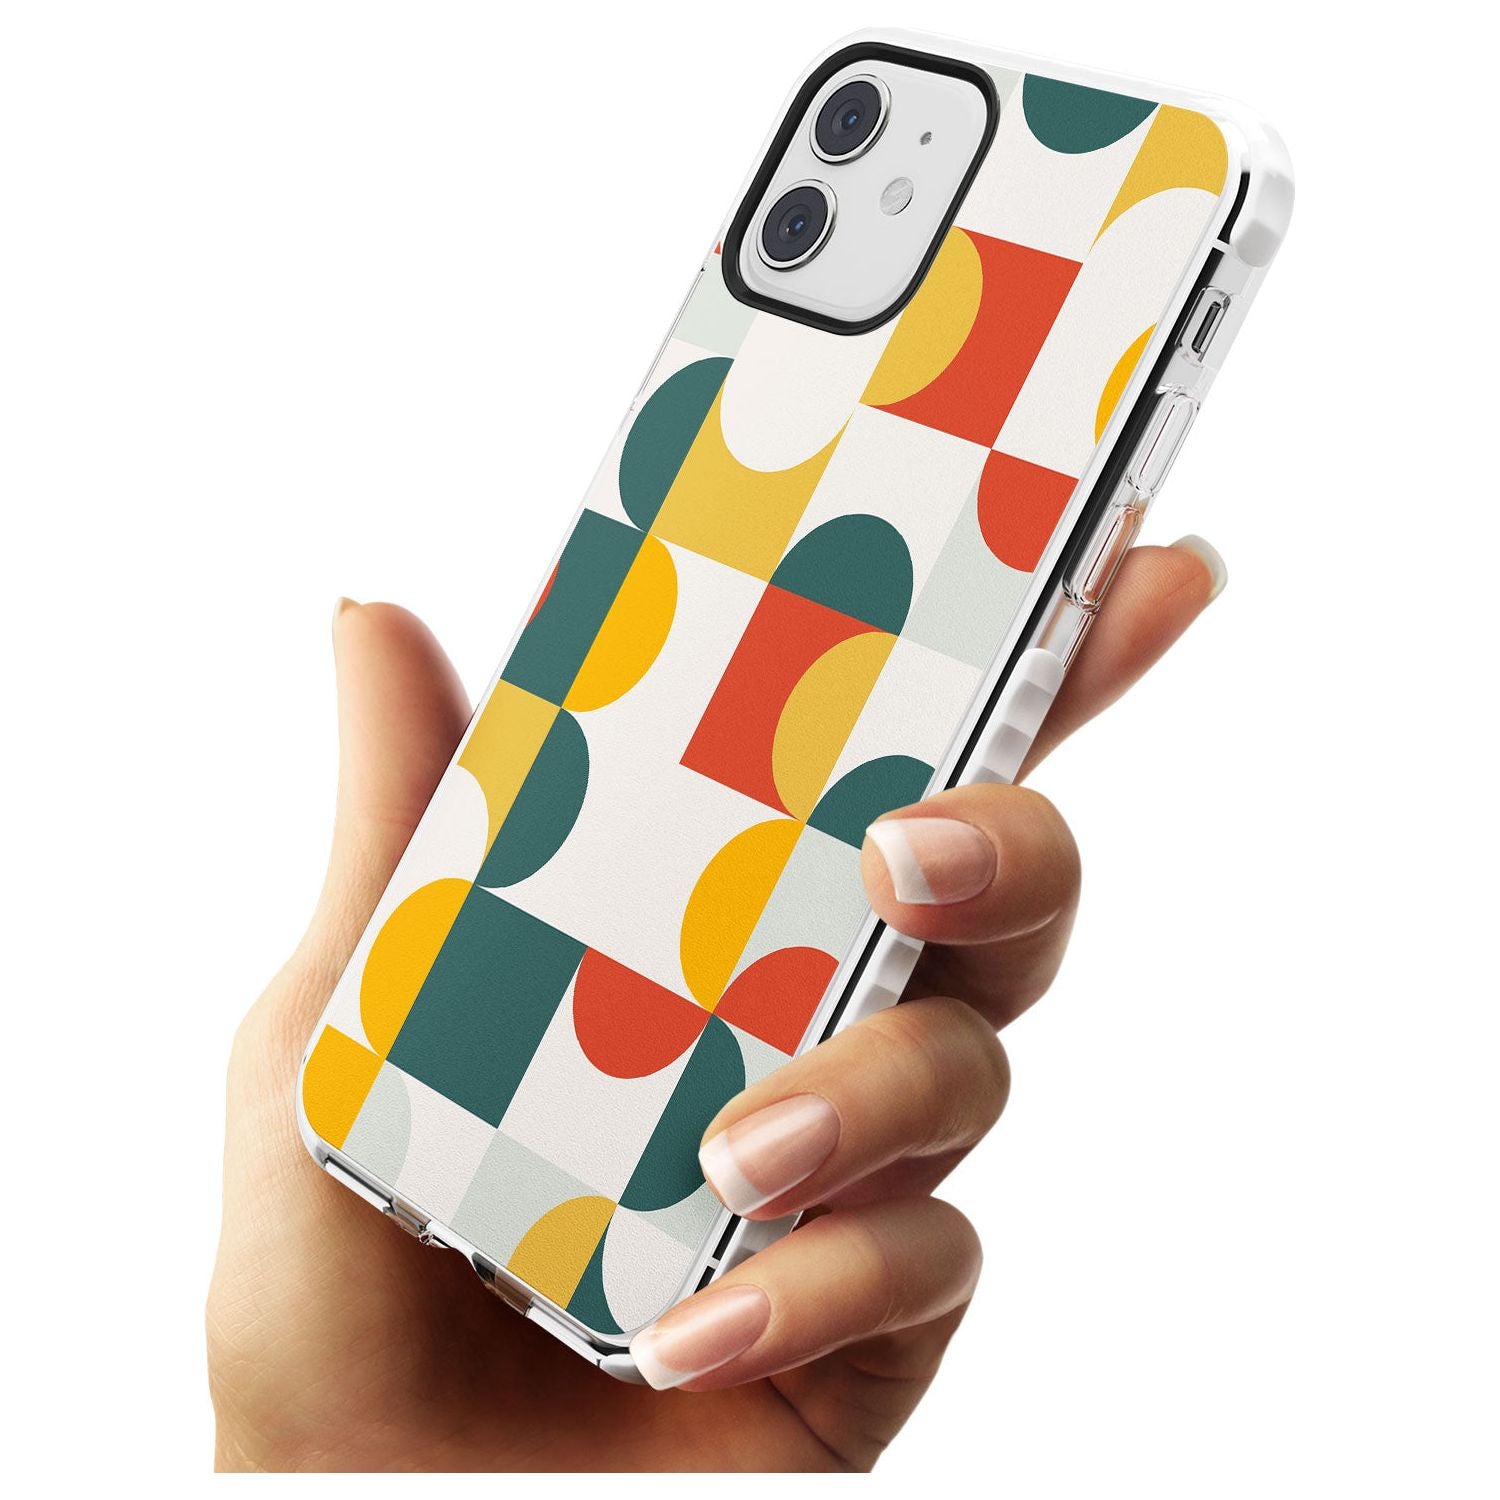 Abstract Retro Shapes: Muted Colour Mix Slim TPU Phone Case for iPhone 11